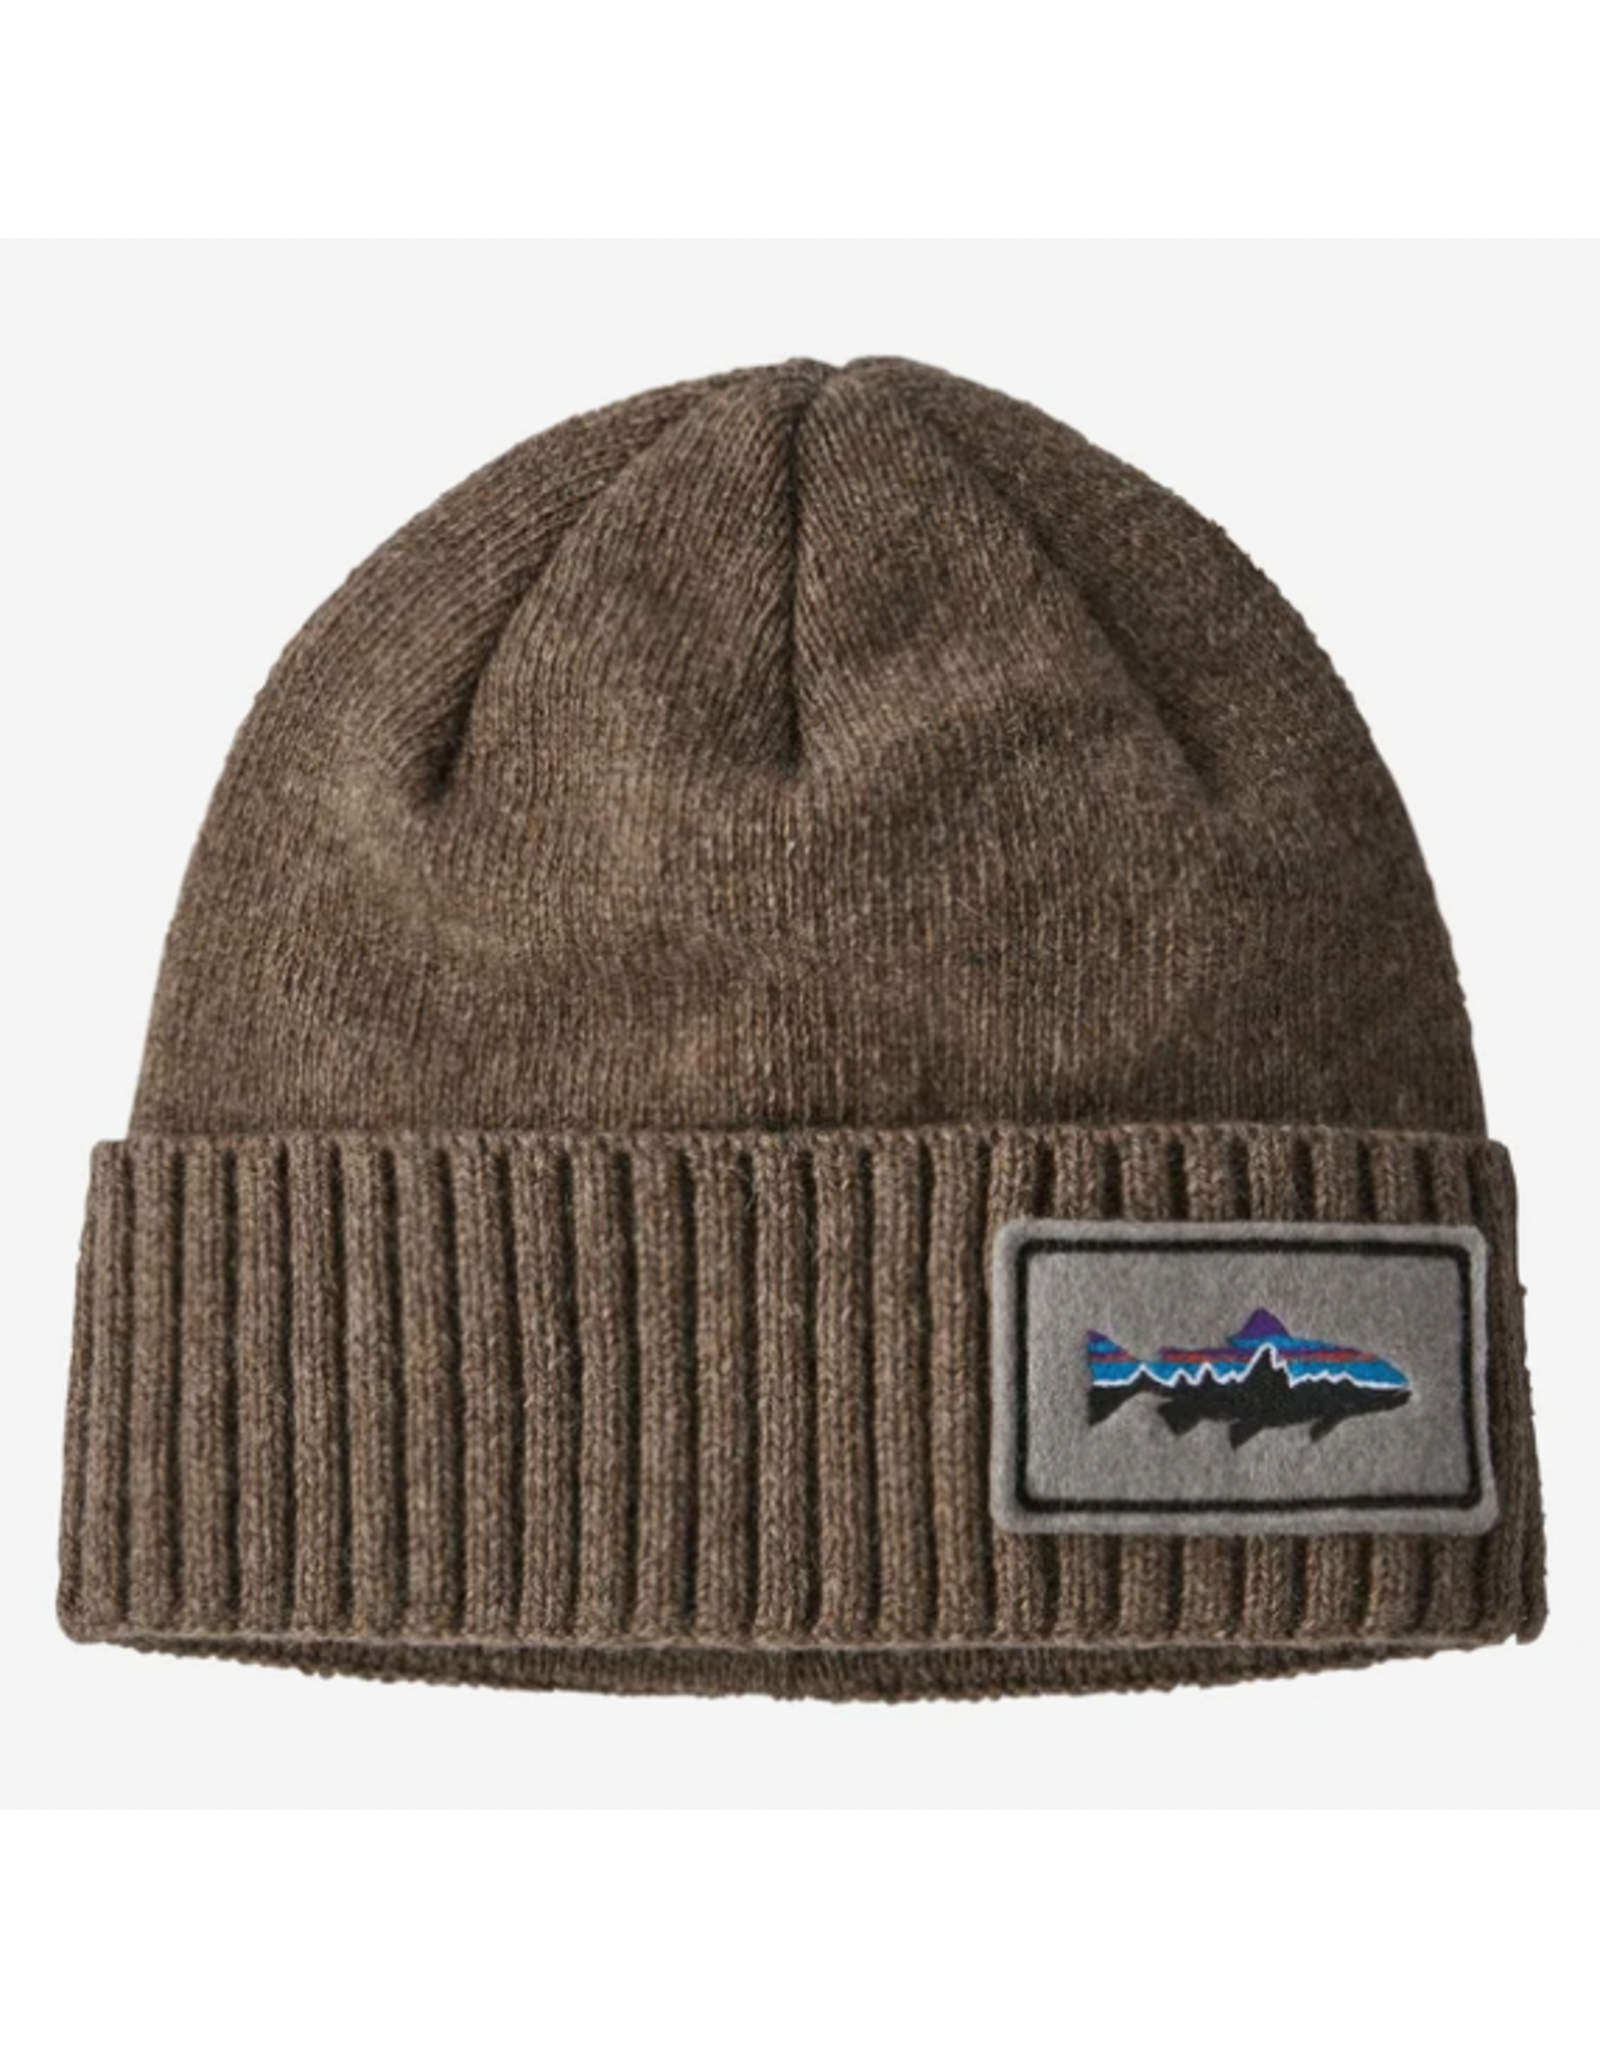 Patagonia Patagonia Brodeo Beanie (Fitz Roy Trout Patch Ash Tan)